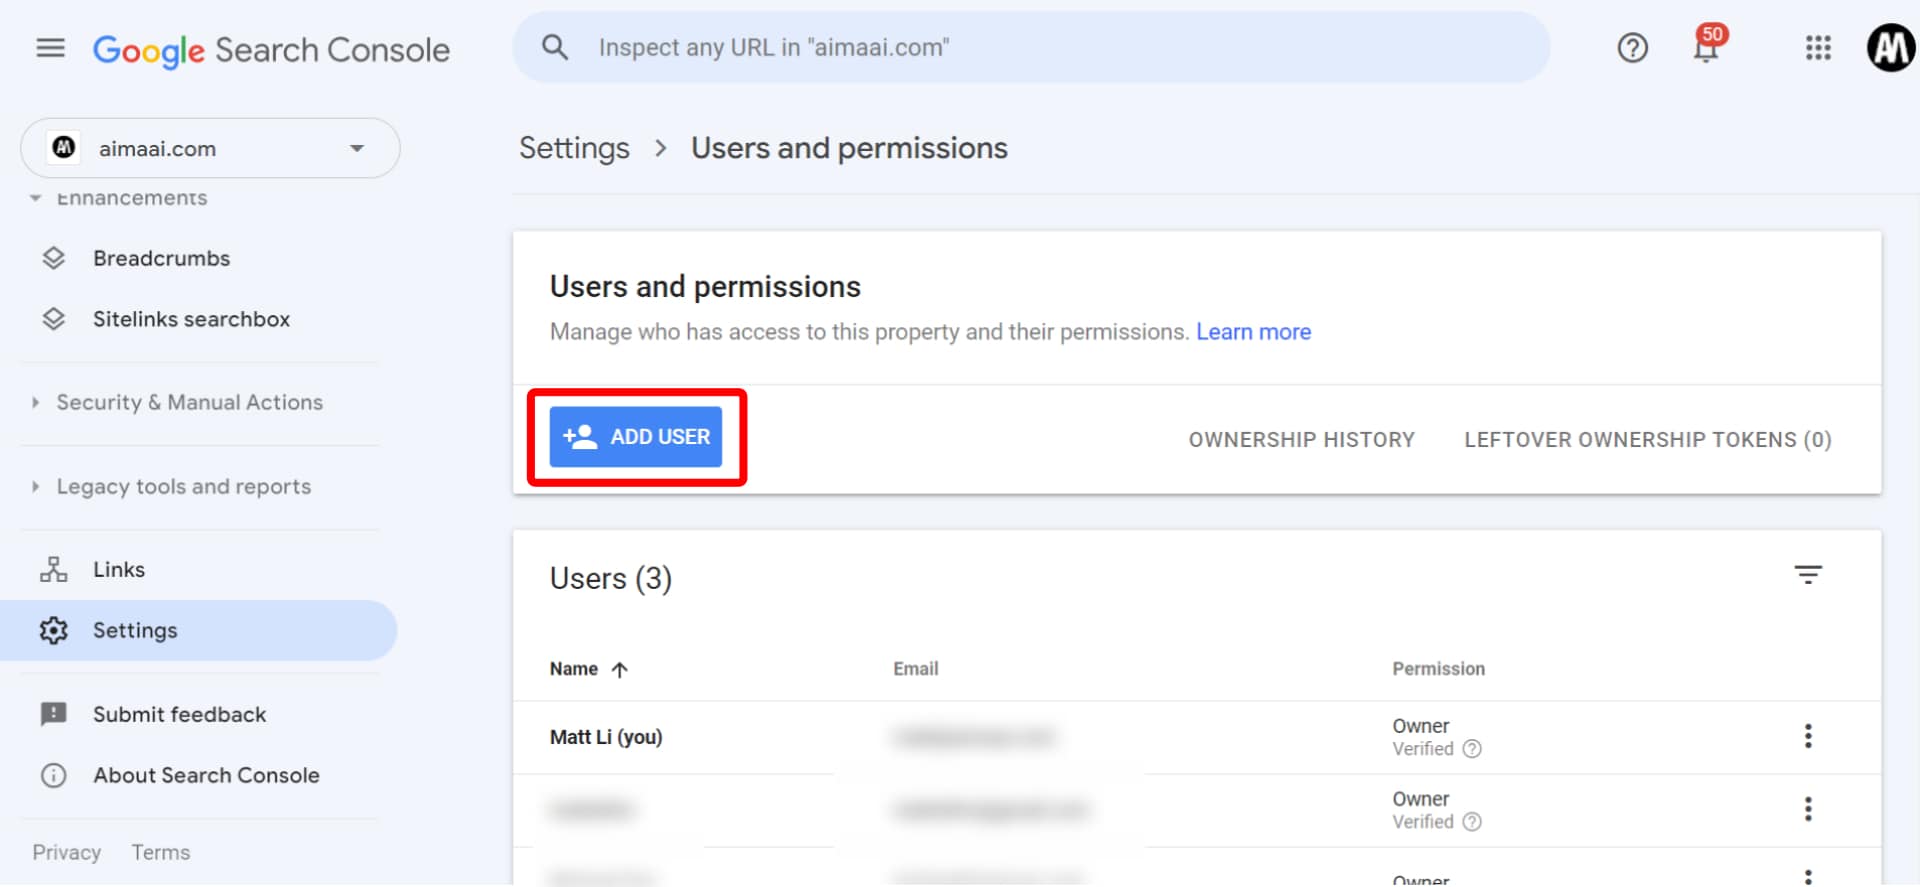 Web page showing google search console "settings" with "users and permissions" tab open, highlighting an "add user" button.